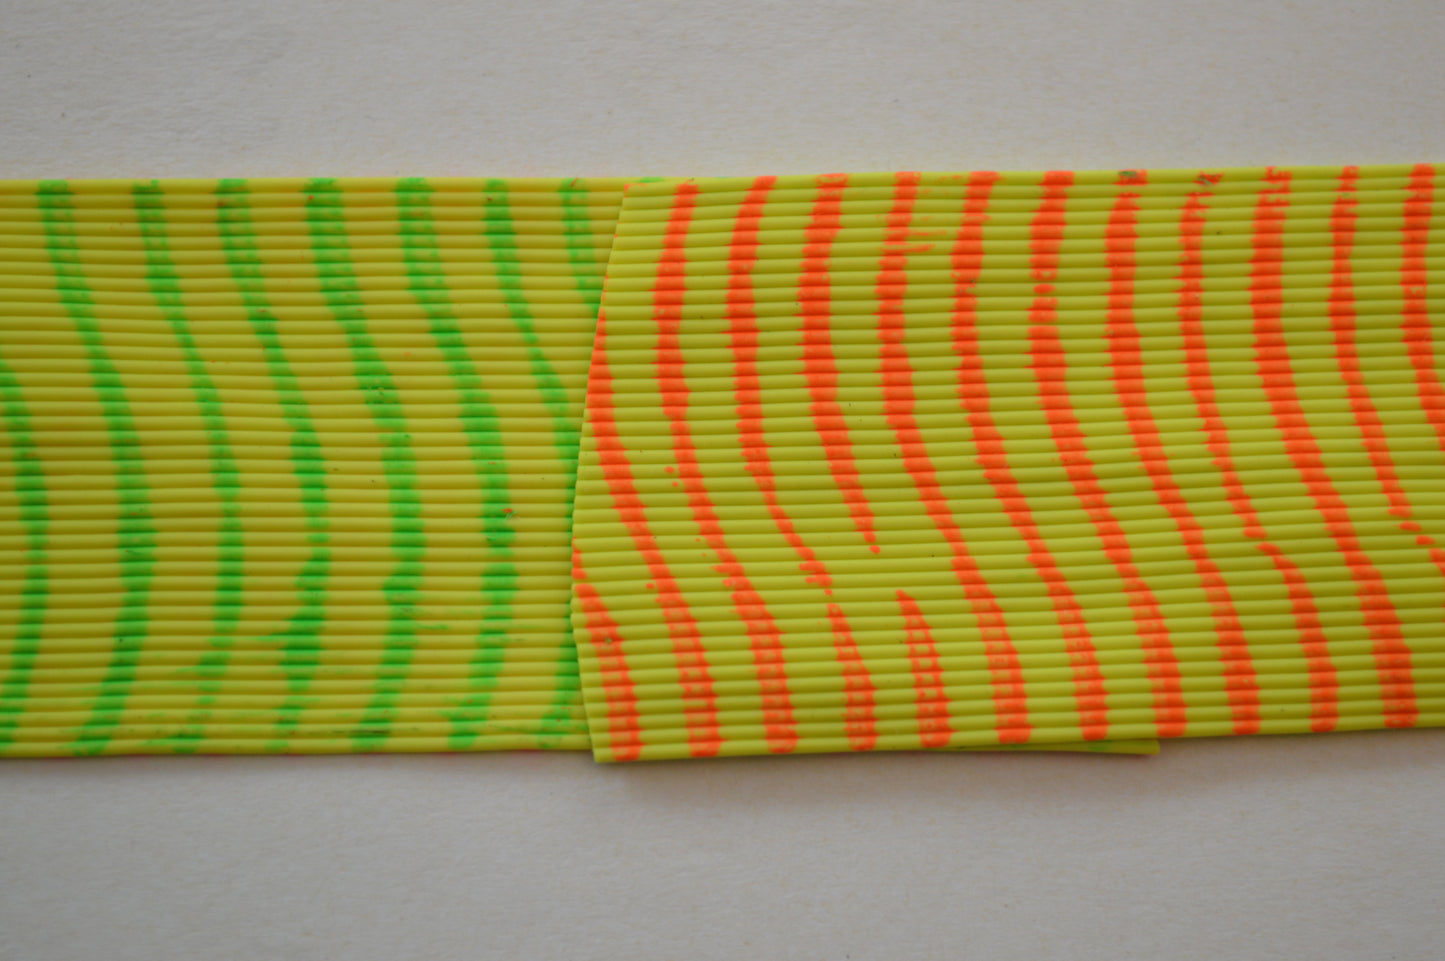 Medium Reptile Living Rubber Chartreuse with Orange on 1 side and Lime on 1 side-C-02-04